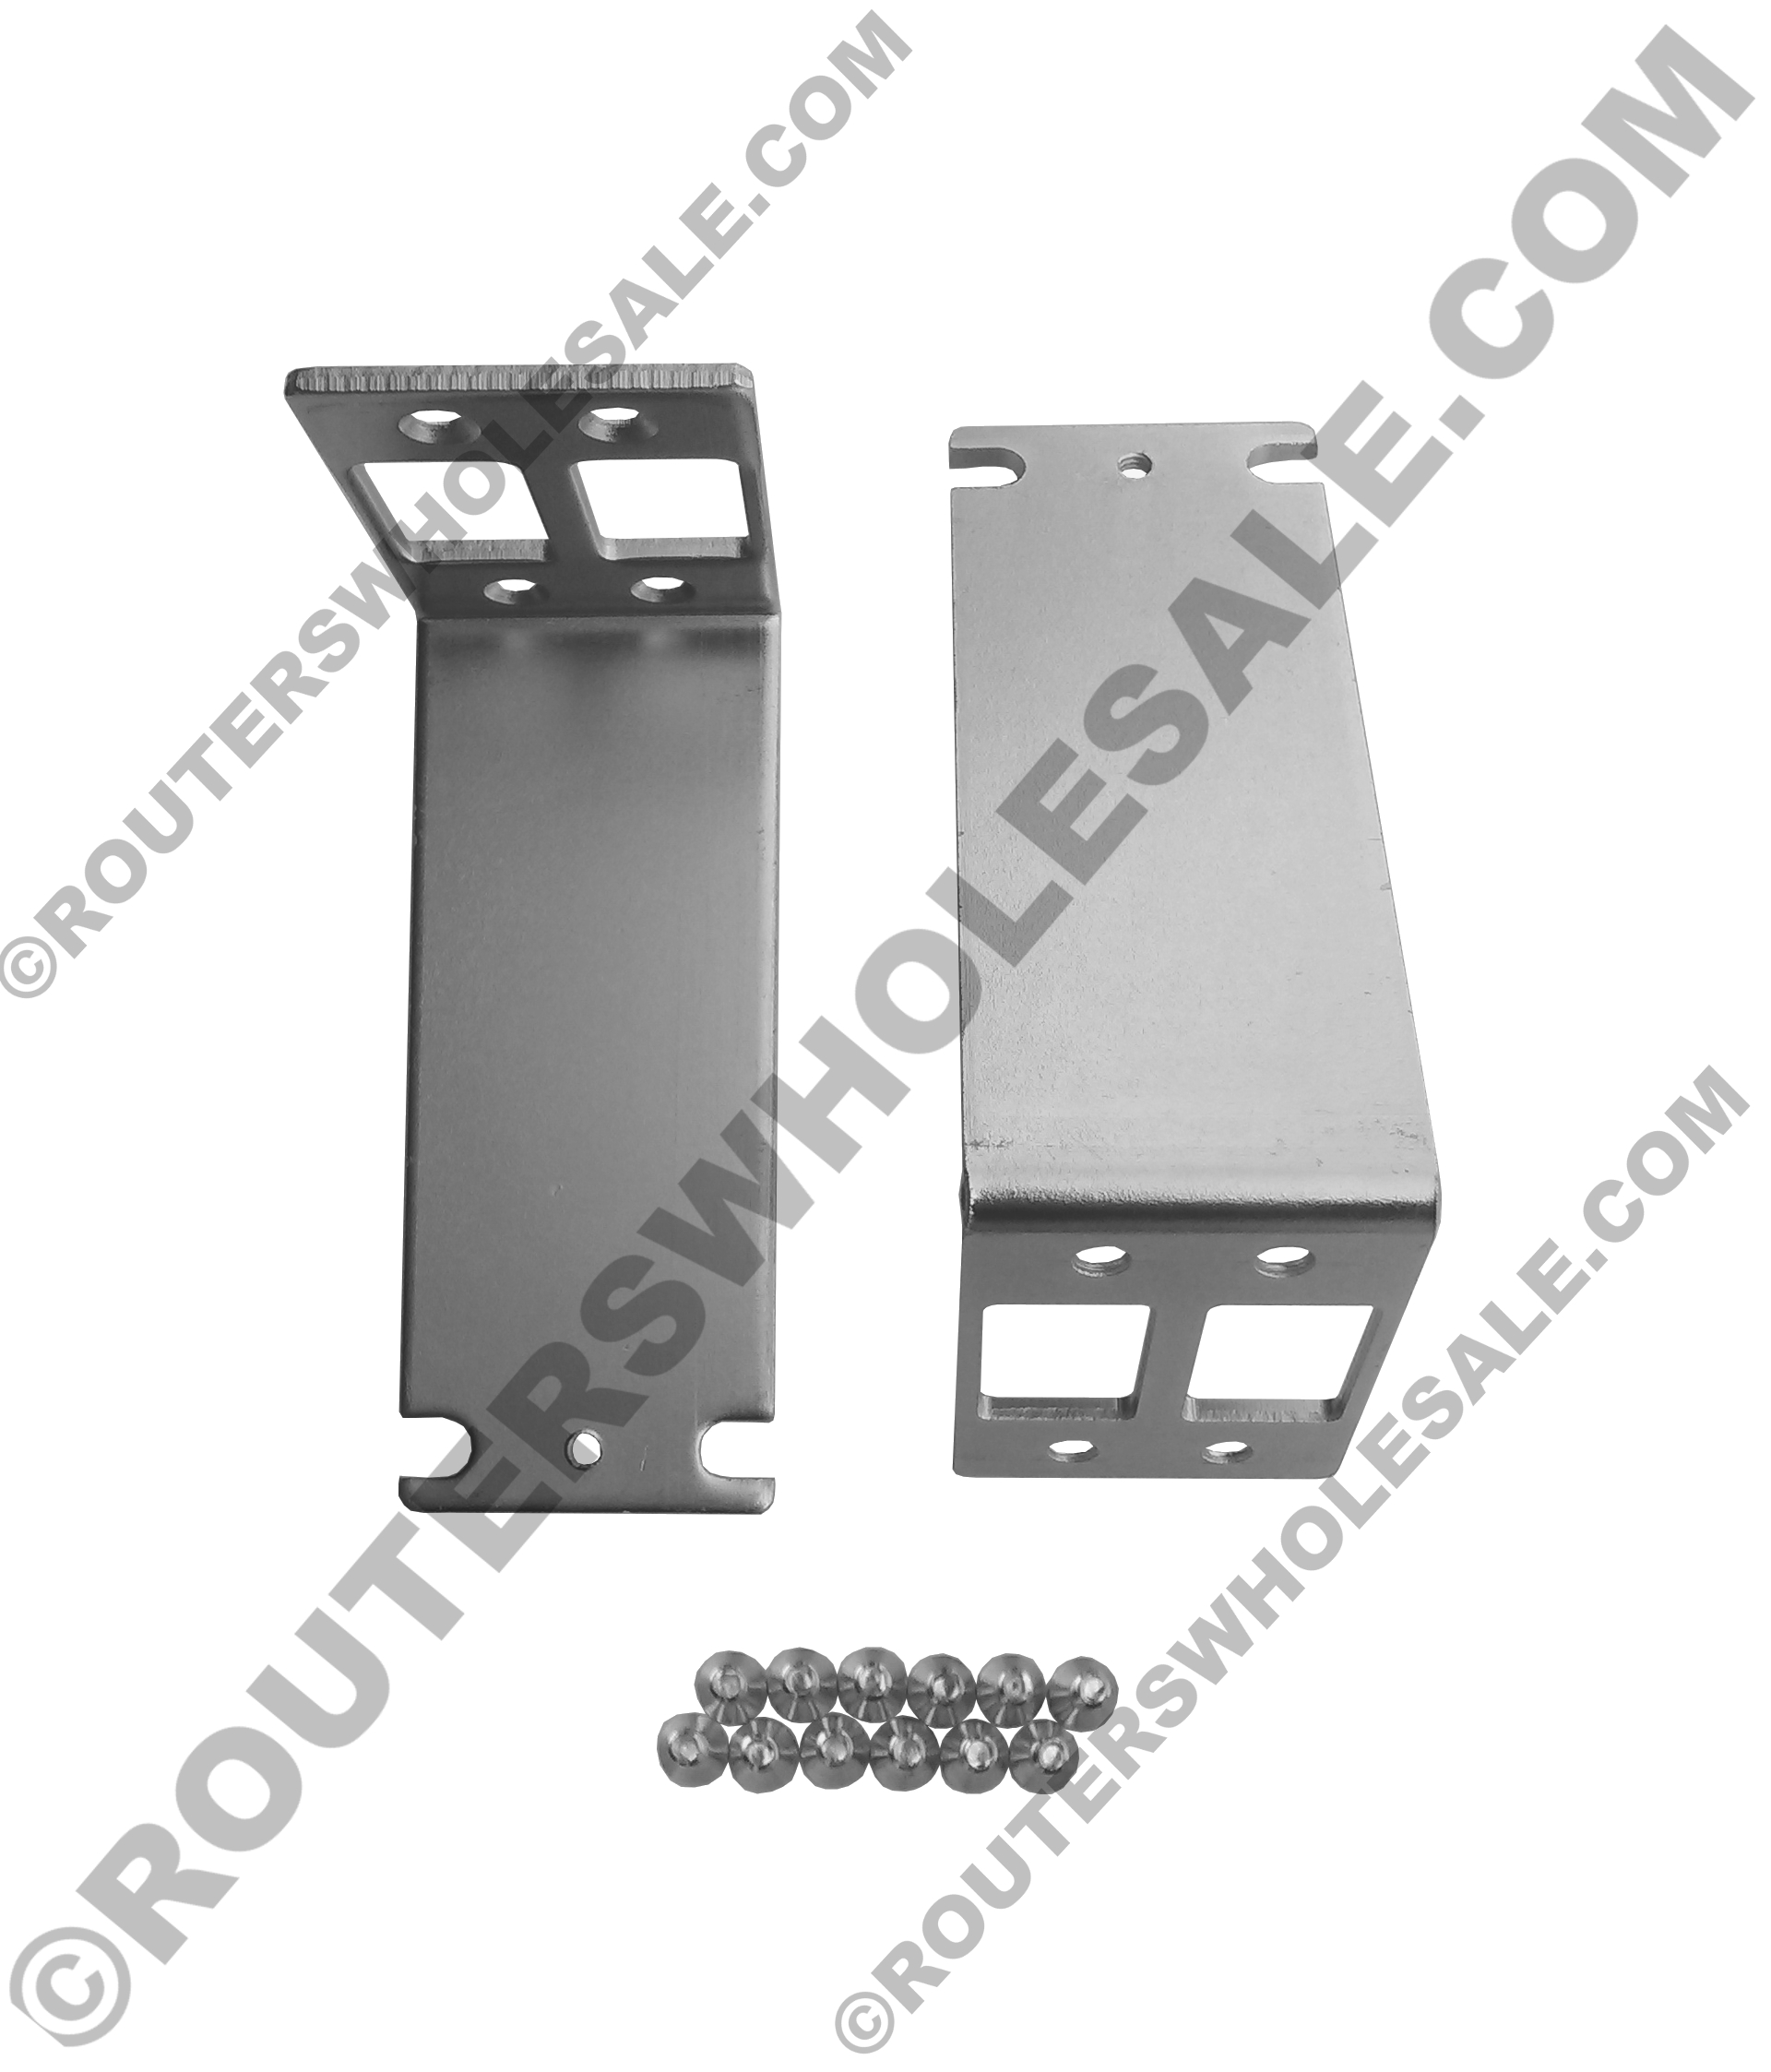 19" Rack Mount Kit for Cisco 1861 - Click Image to Close